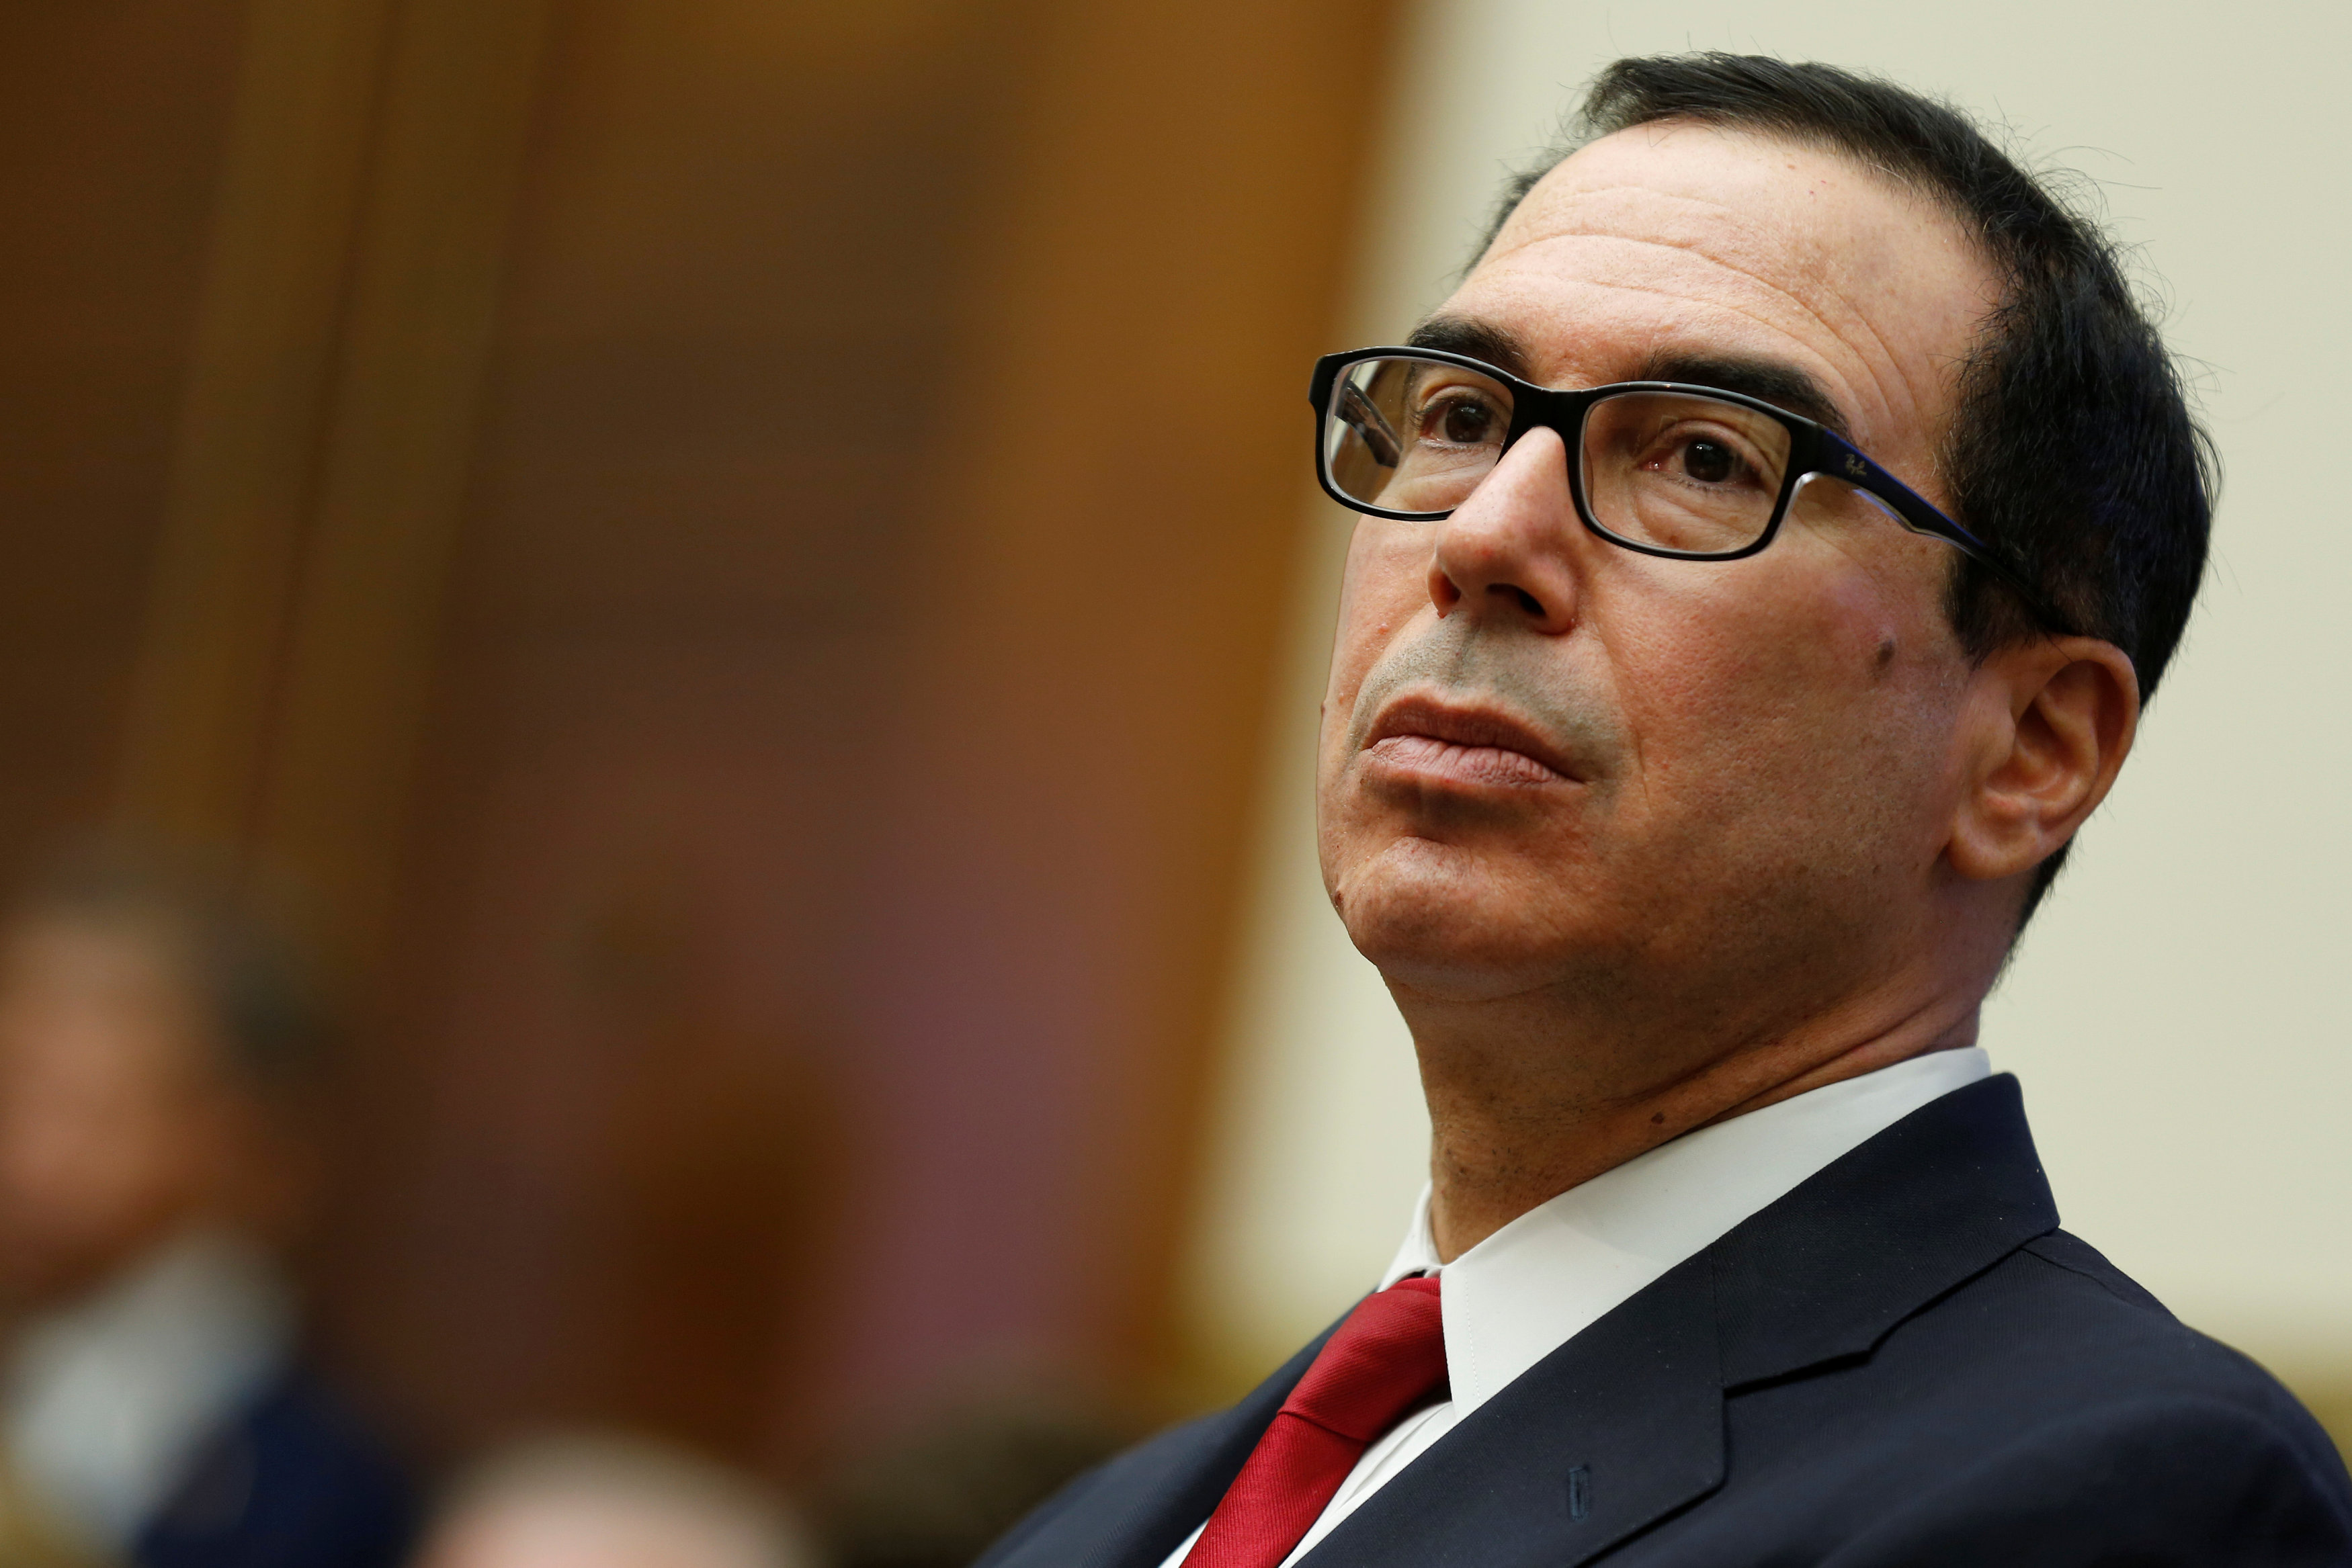 US to consider waivers on Iran sanctions, says Mnuchin